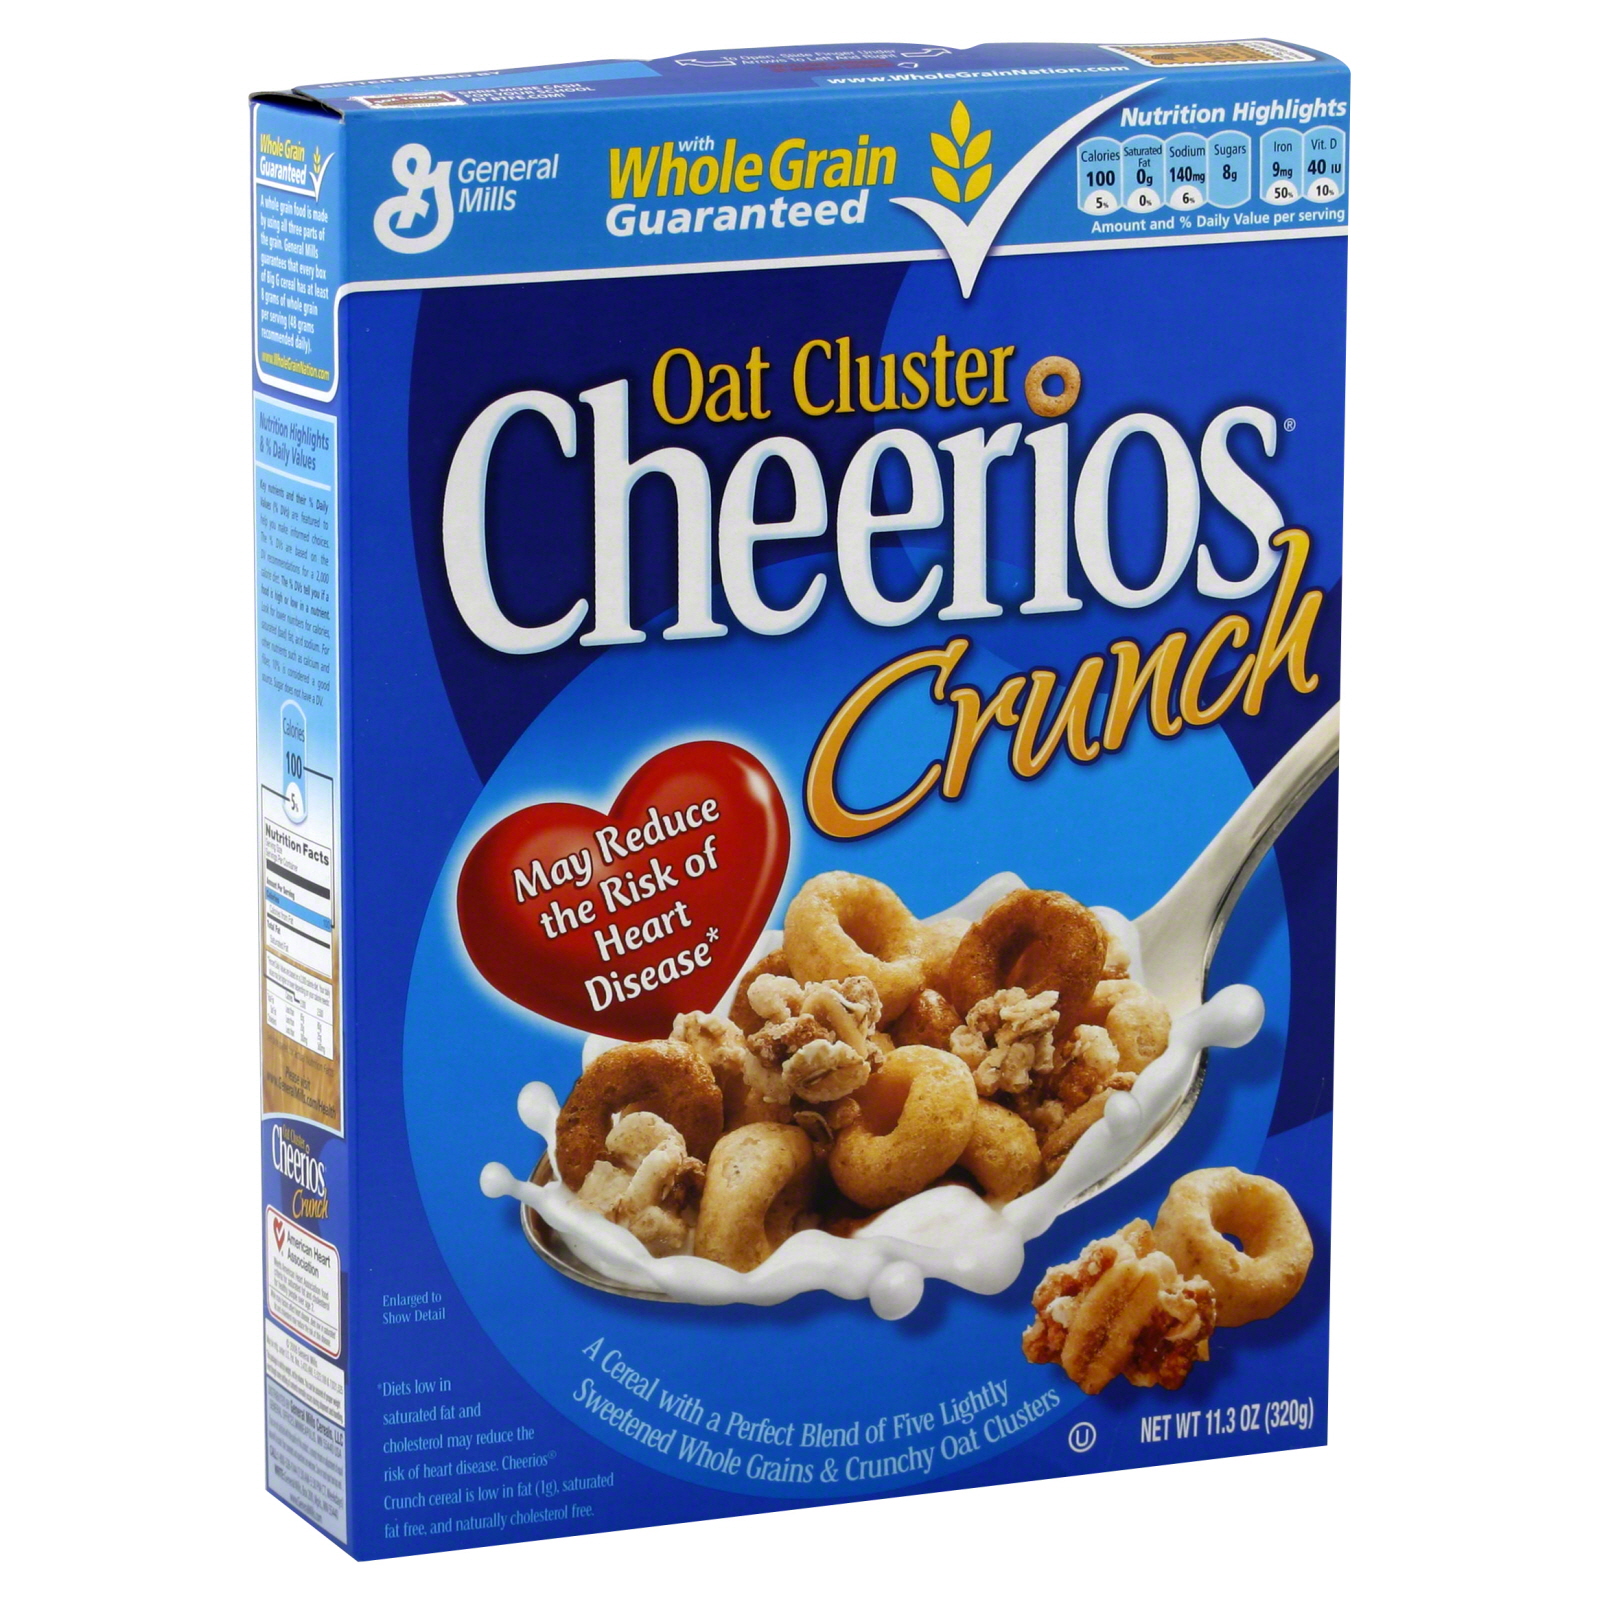 Cheerios Crunch Cereal, Oat Cluster, 11.3 oz (320 g)